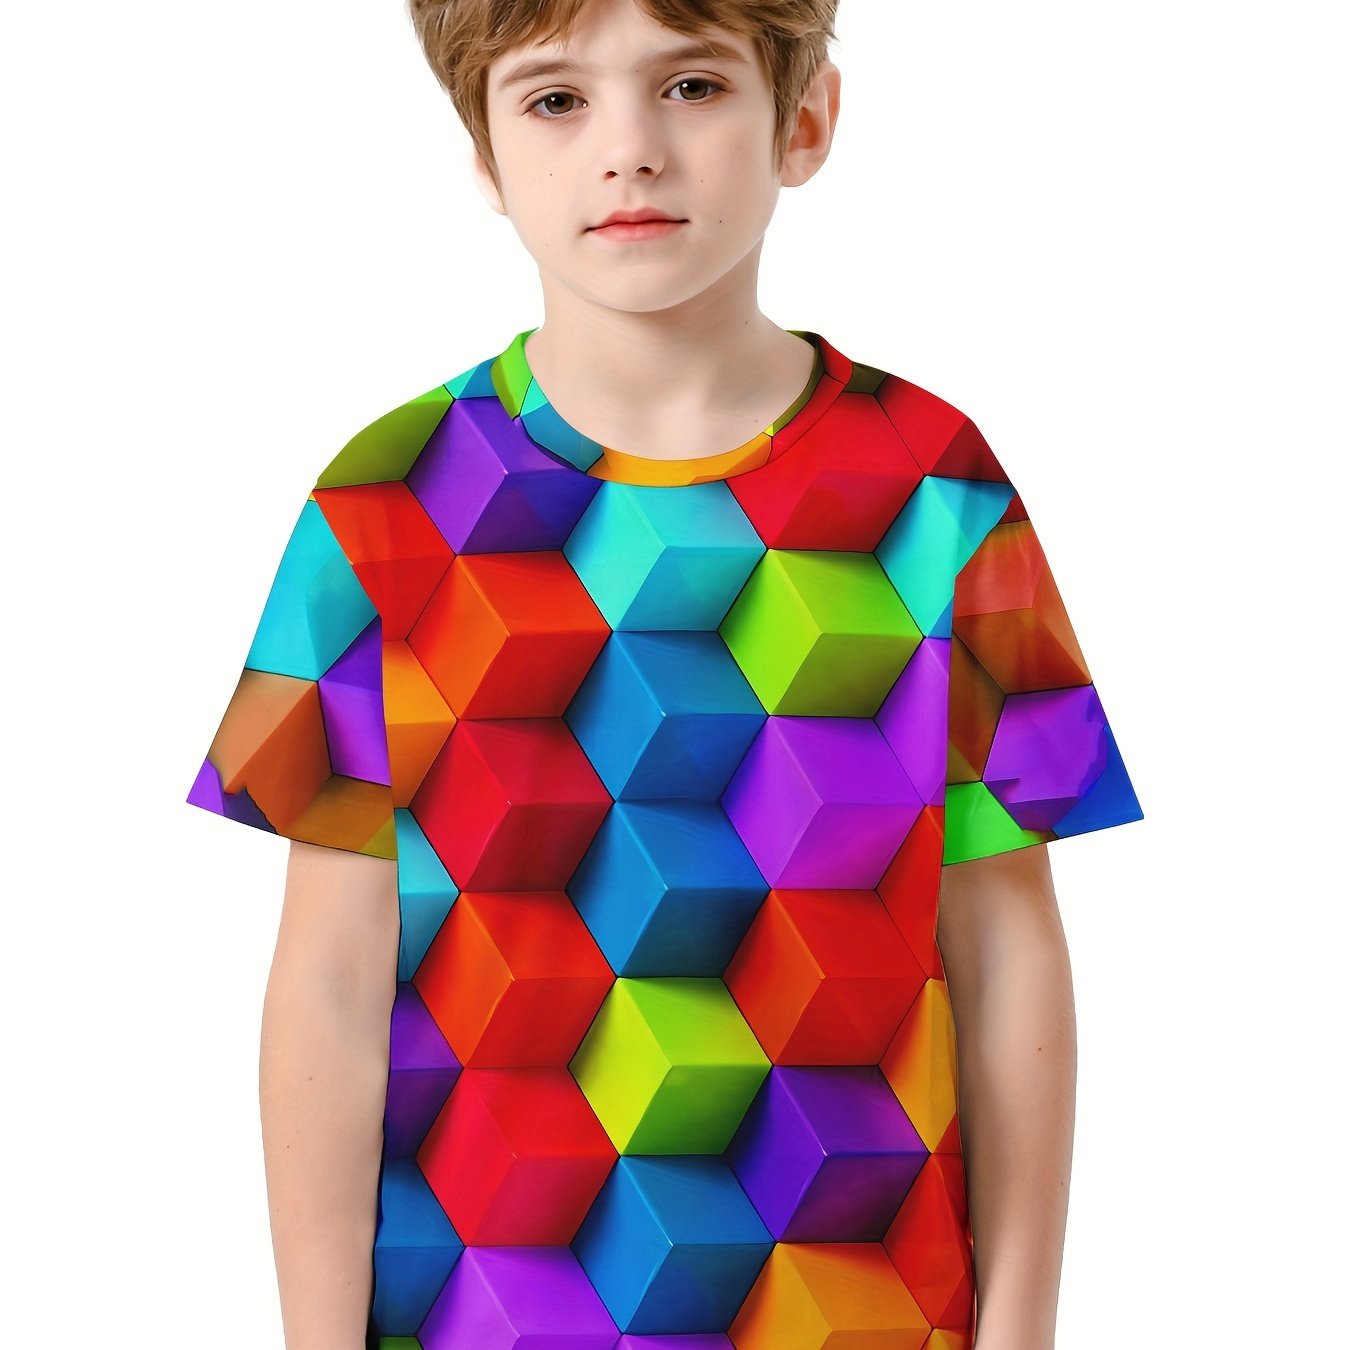 

Cool 3d Cube Graphic T-shirt For Boys - Active, Stretchy & Perfect For Summer Outings!